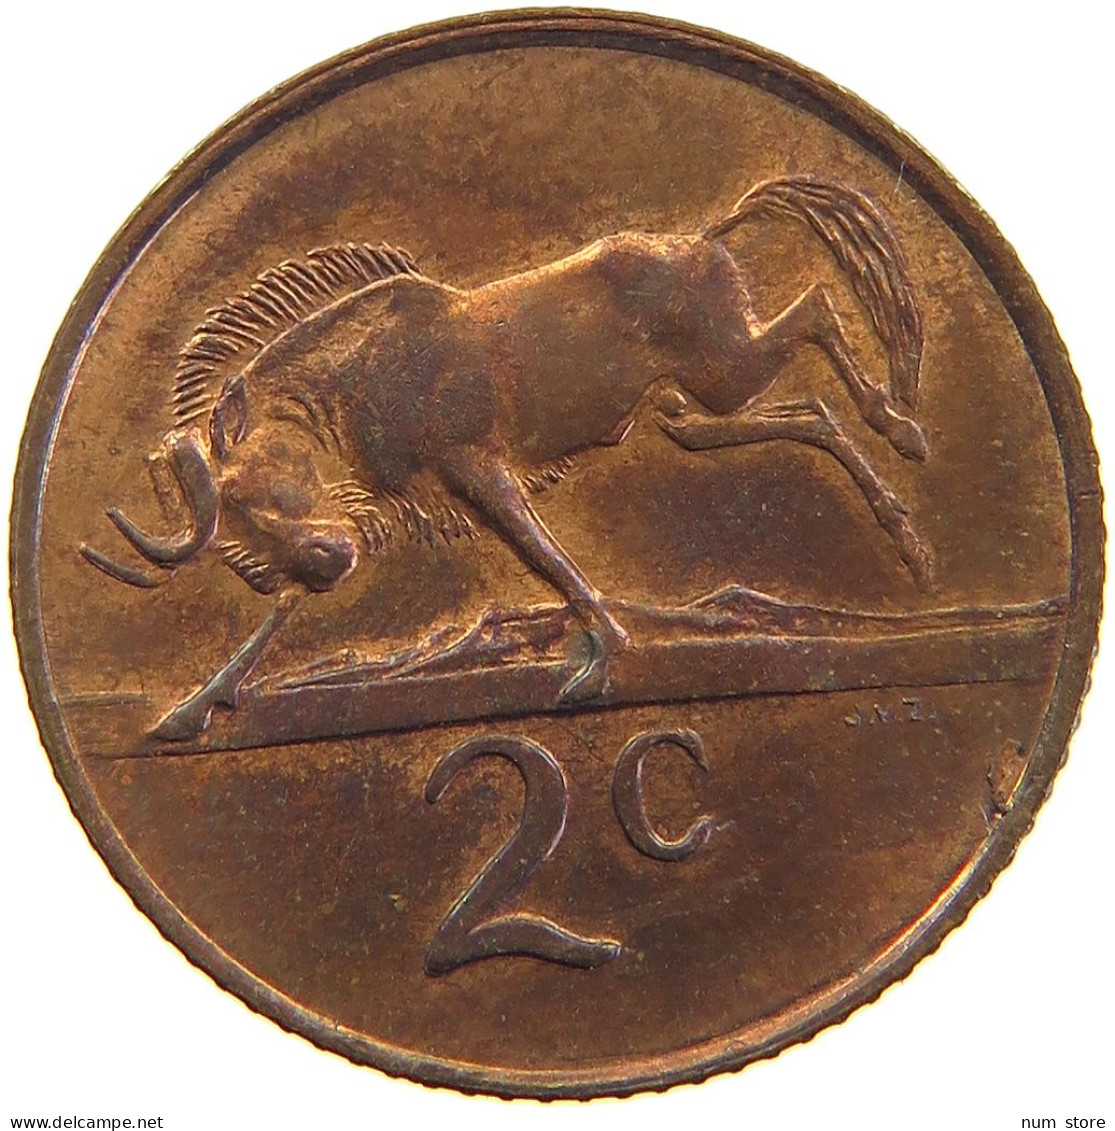 SOUTH AFRICA 2 CENTS 1968 #s105 0241 - Sudáfrica